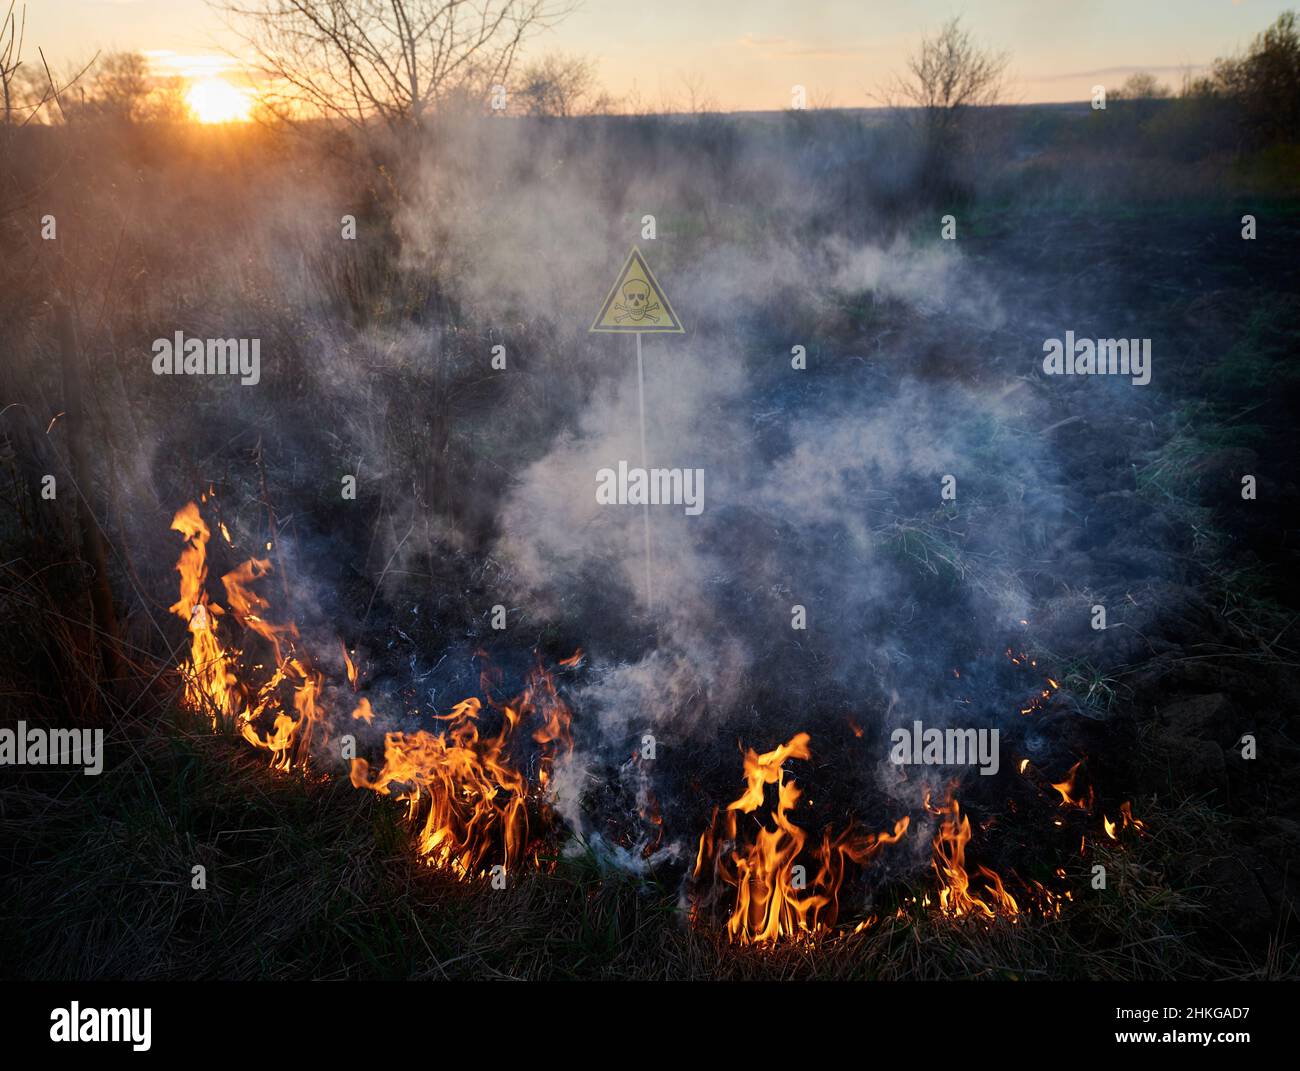 Burning dry grass and toxic sign at sunset. Yellow triangle with skull and crossbones sign warning about poisonous substances and danger in field with fire. Ecology, hazard, natural disaster concept. Stock Photo